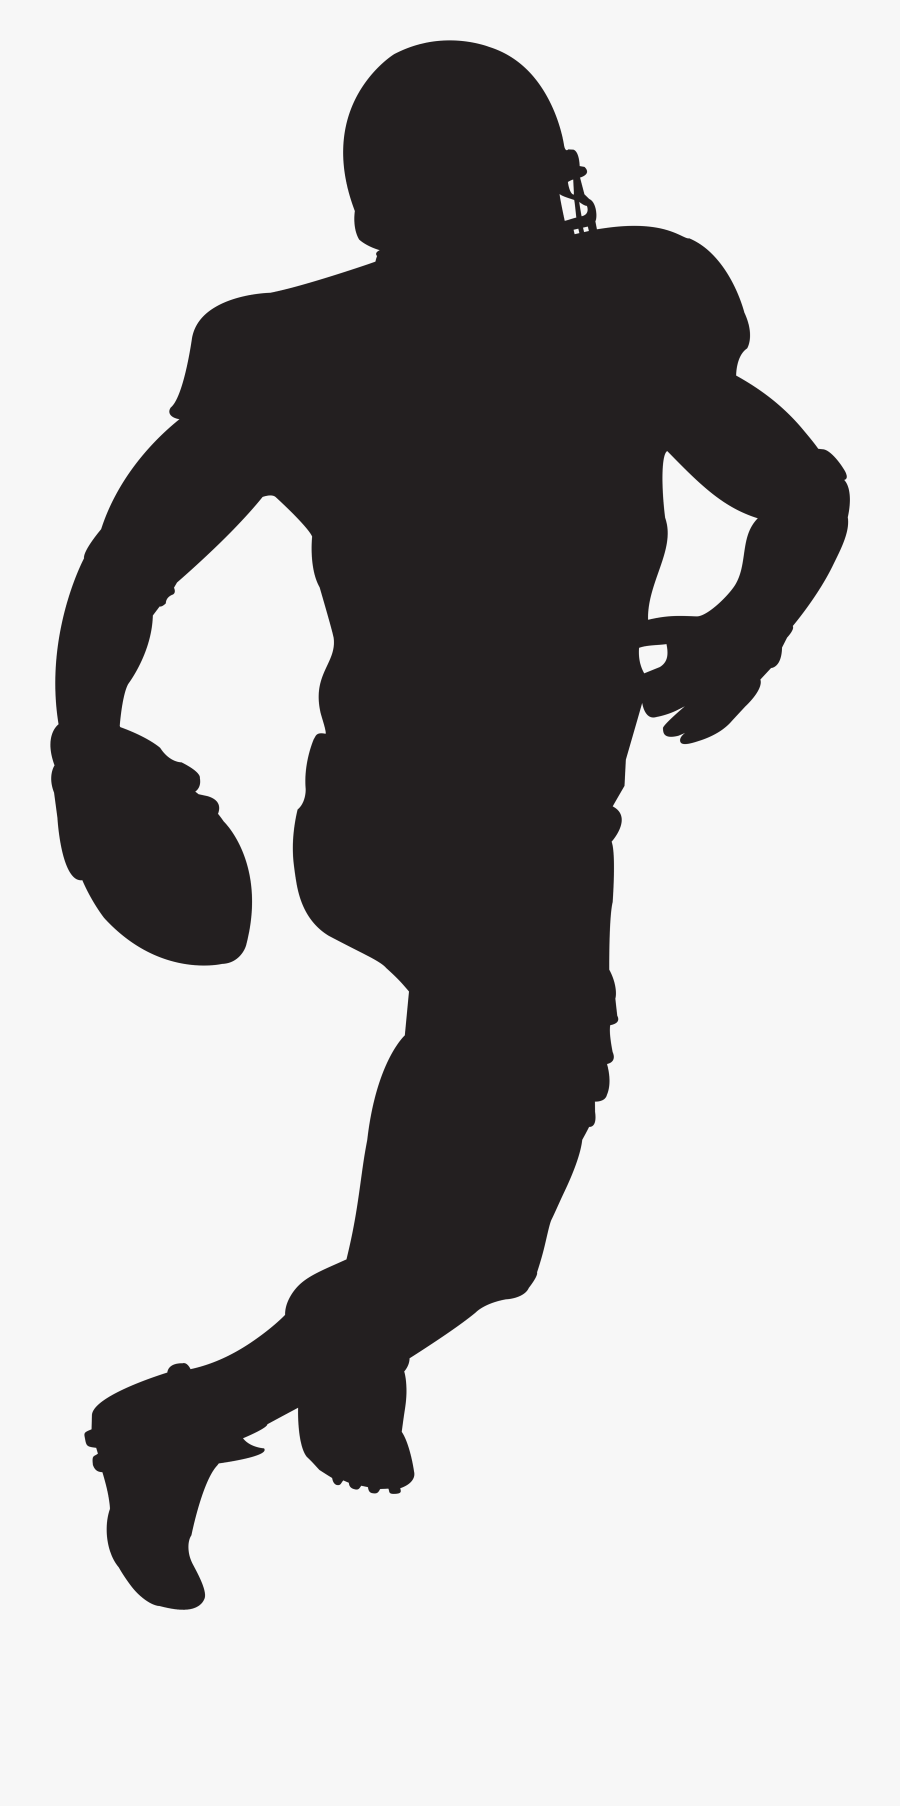 American Football Player Silhouette Transparent Image - Transparent American Football Player Silhouette, Transparent Clipart